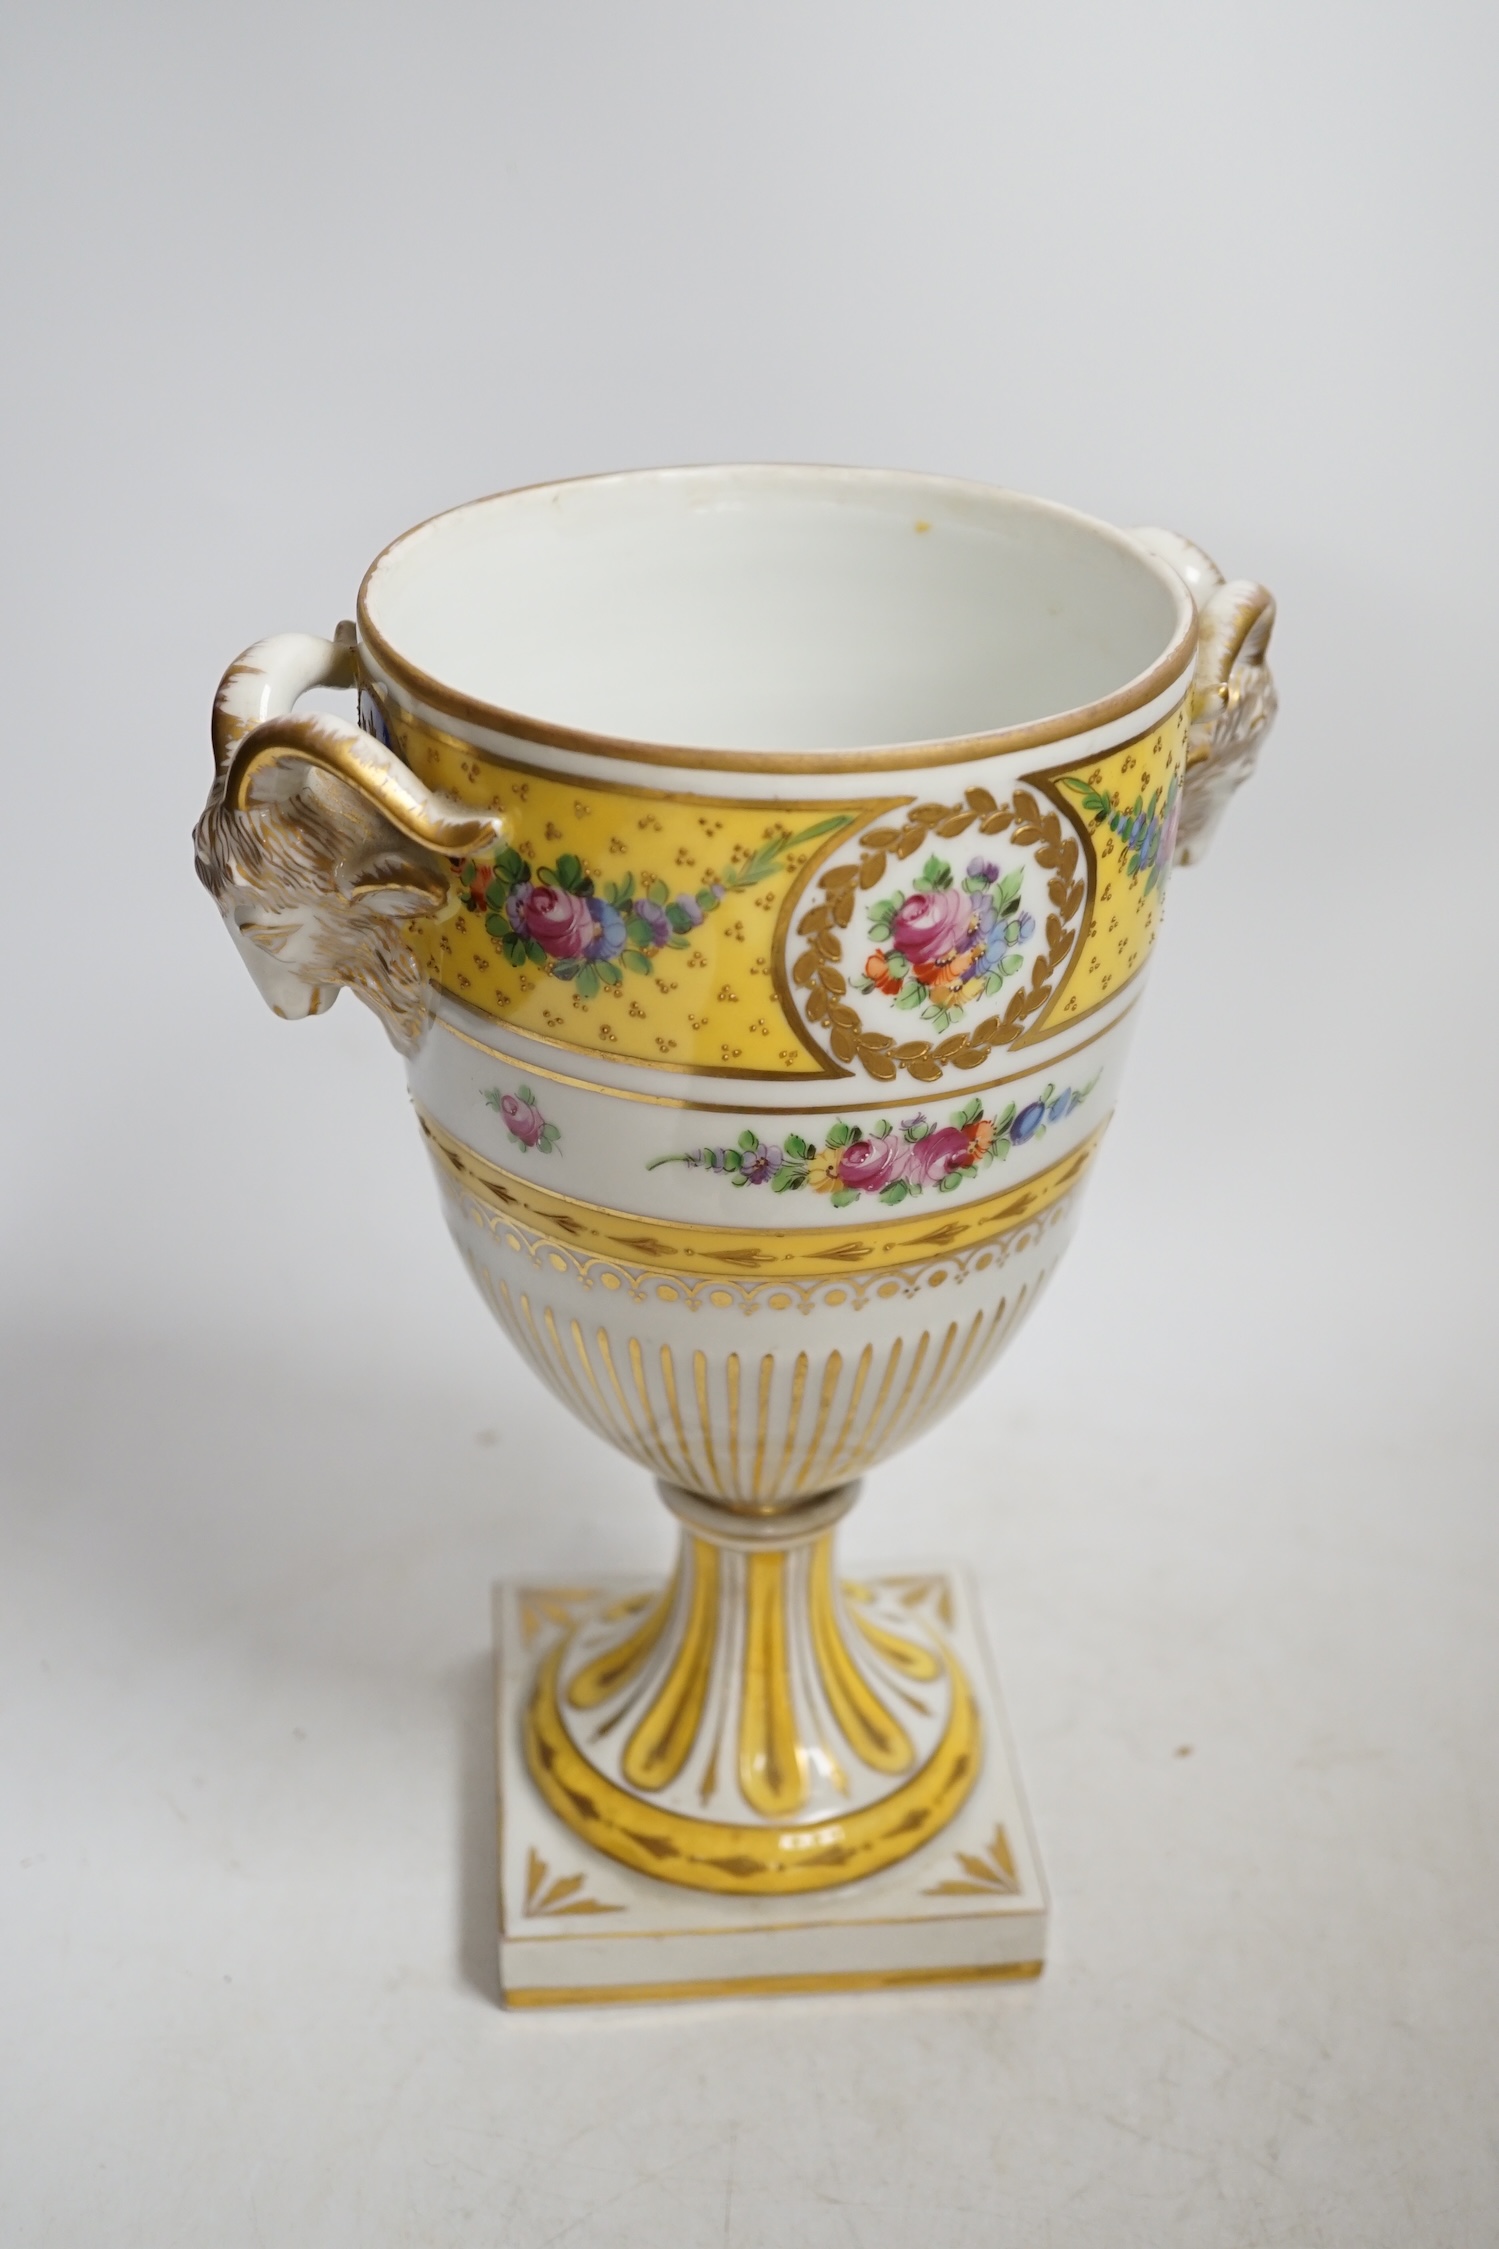 A 20th century Sevres style porcelain urn and cover, 38cm. Condition - fair to good